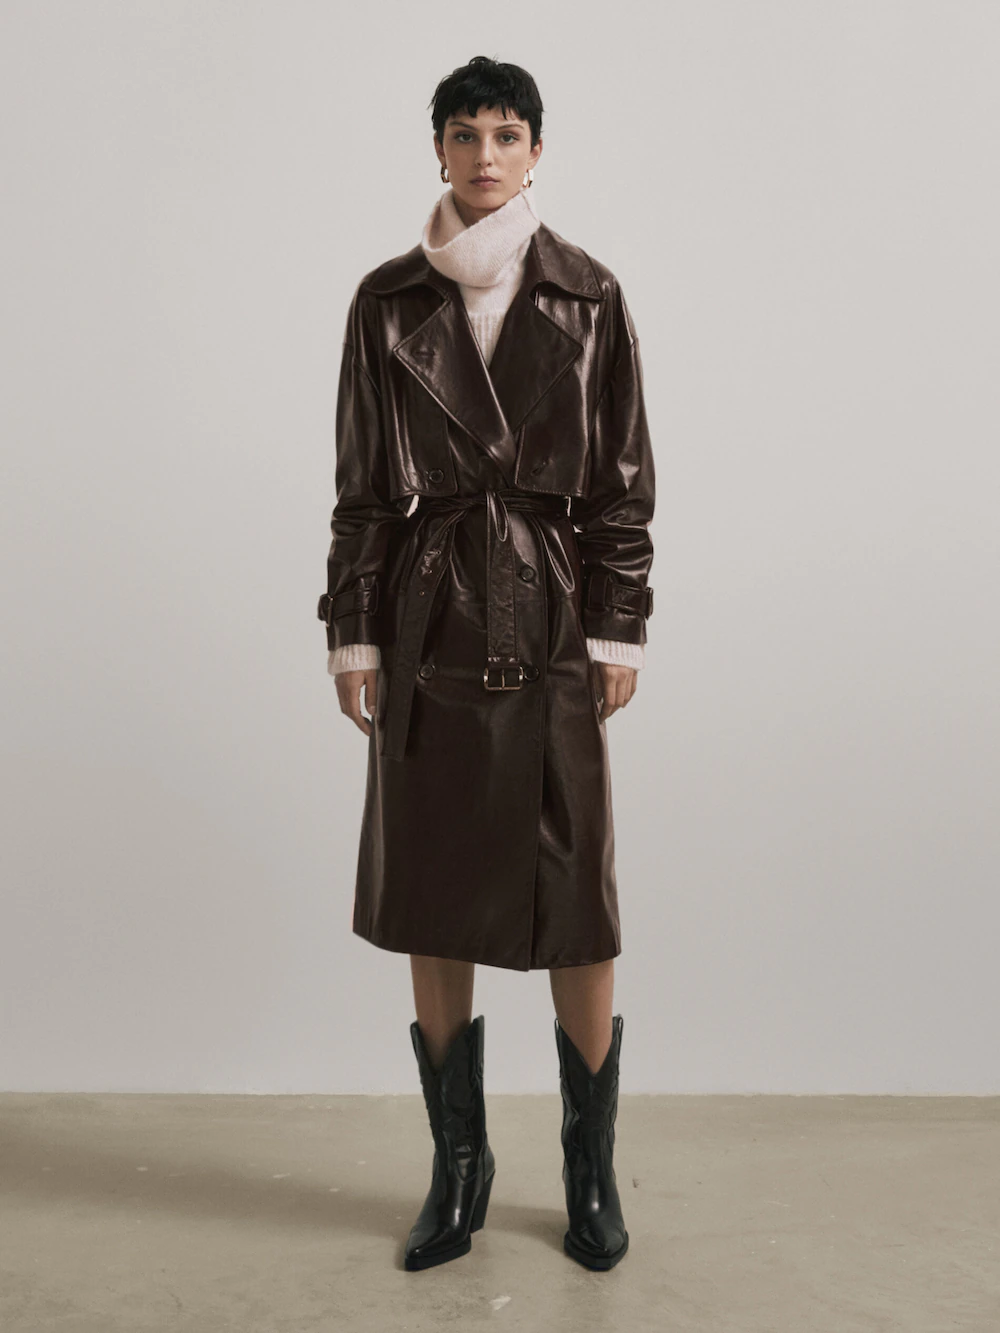 This Massimo Dutti Burgundy leather trench coat comes in a glossy leather that looks so luxe. Leather trench coats are the outerwear must have of AW22. This one has classic trench styling with a lapel collar, double breasted button fastening and tie belt. It is half lined. 